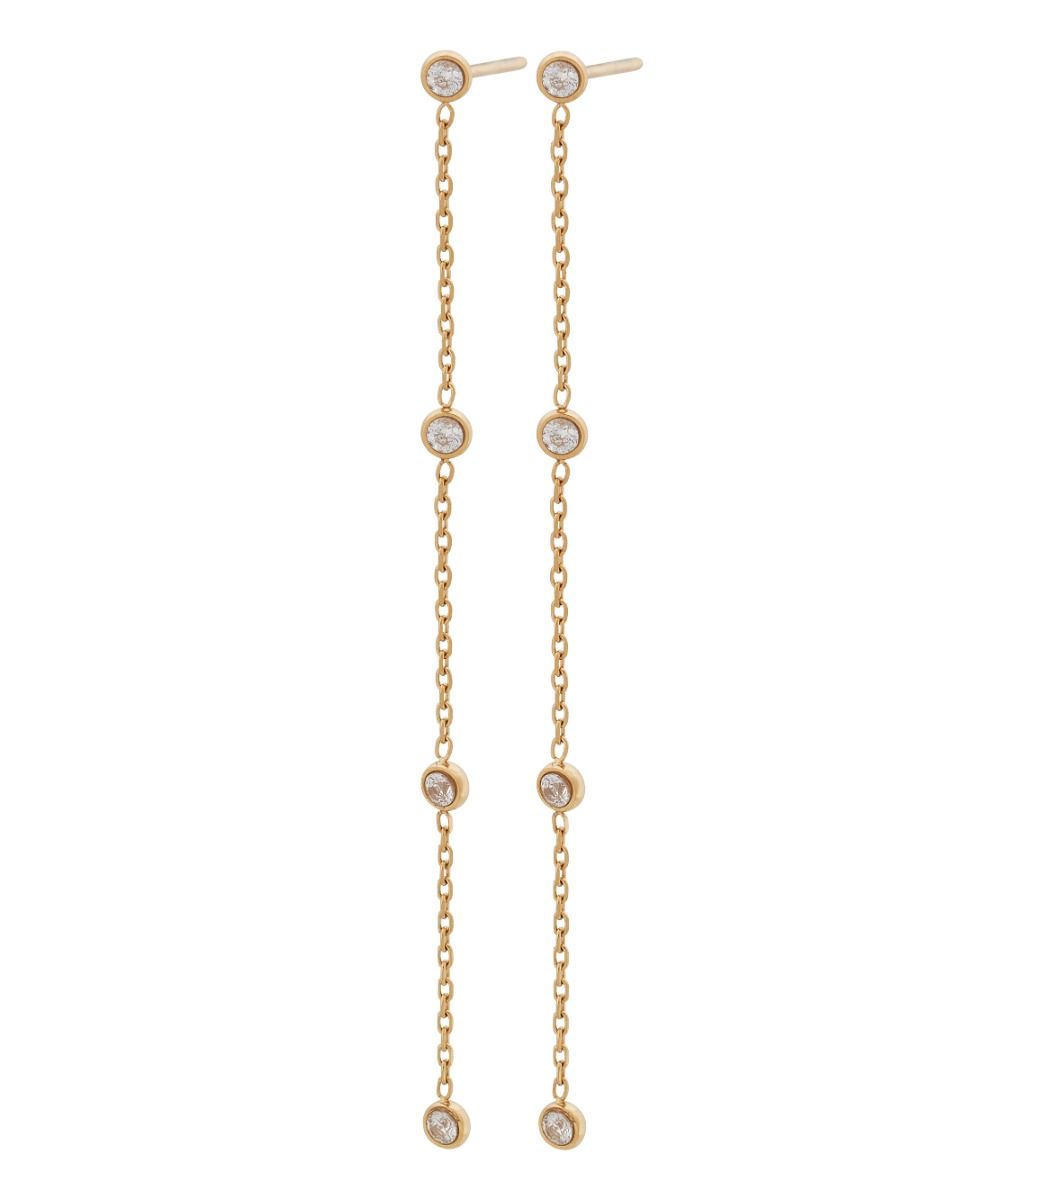 Long gold chain earrings with four round cubic zirconia along the length of the drop